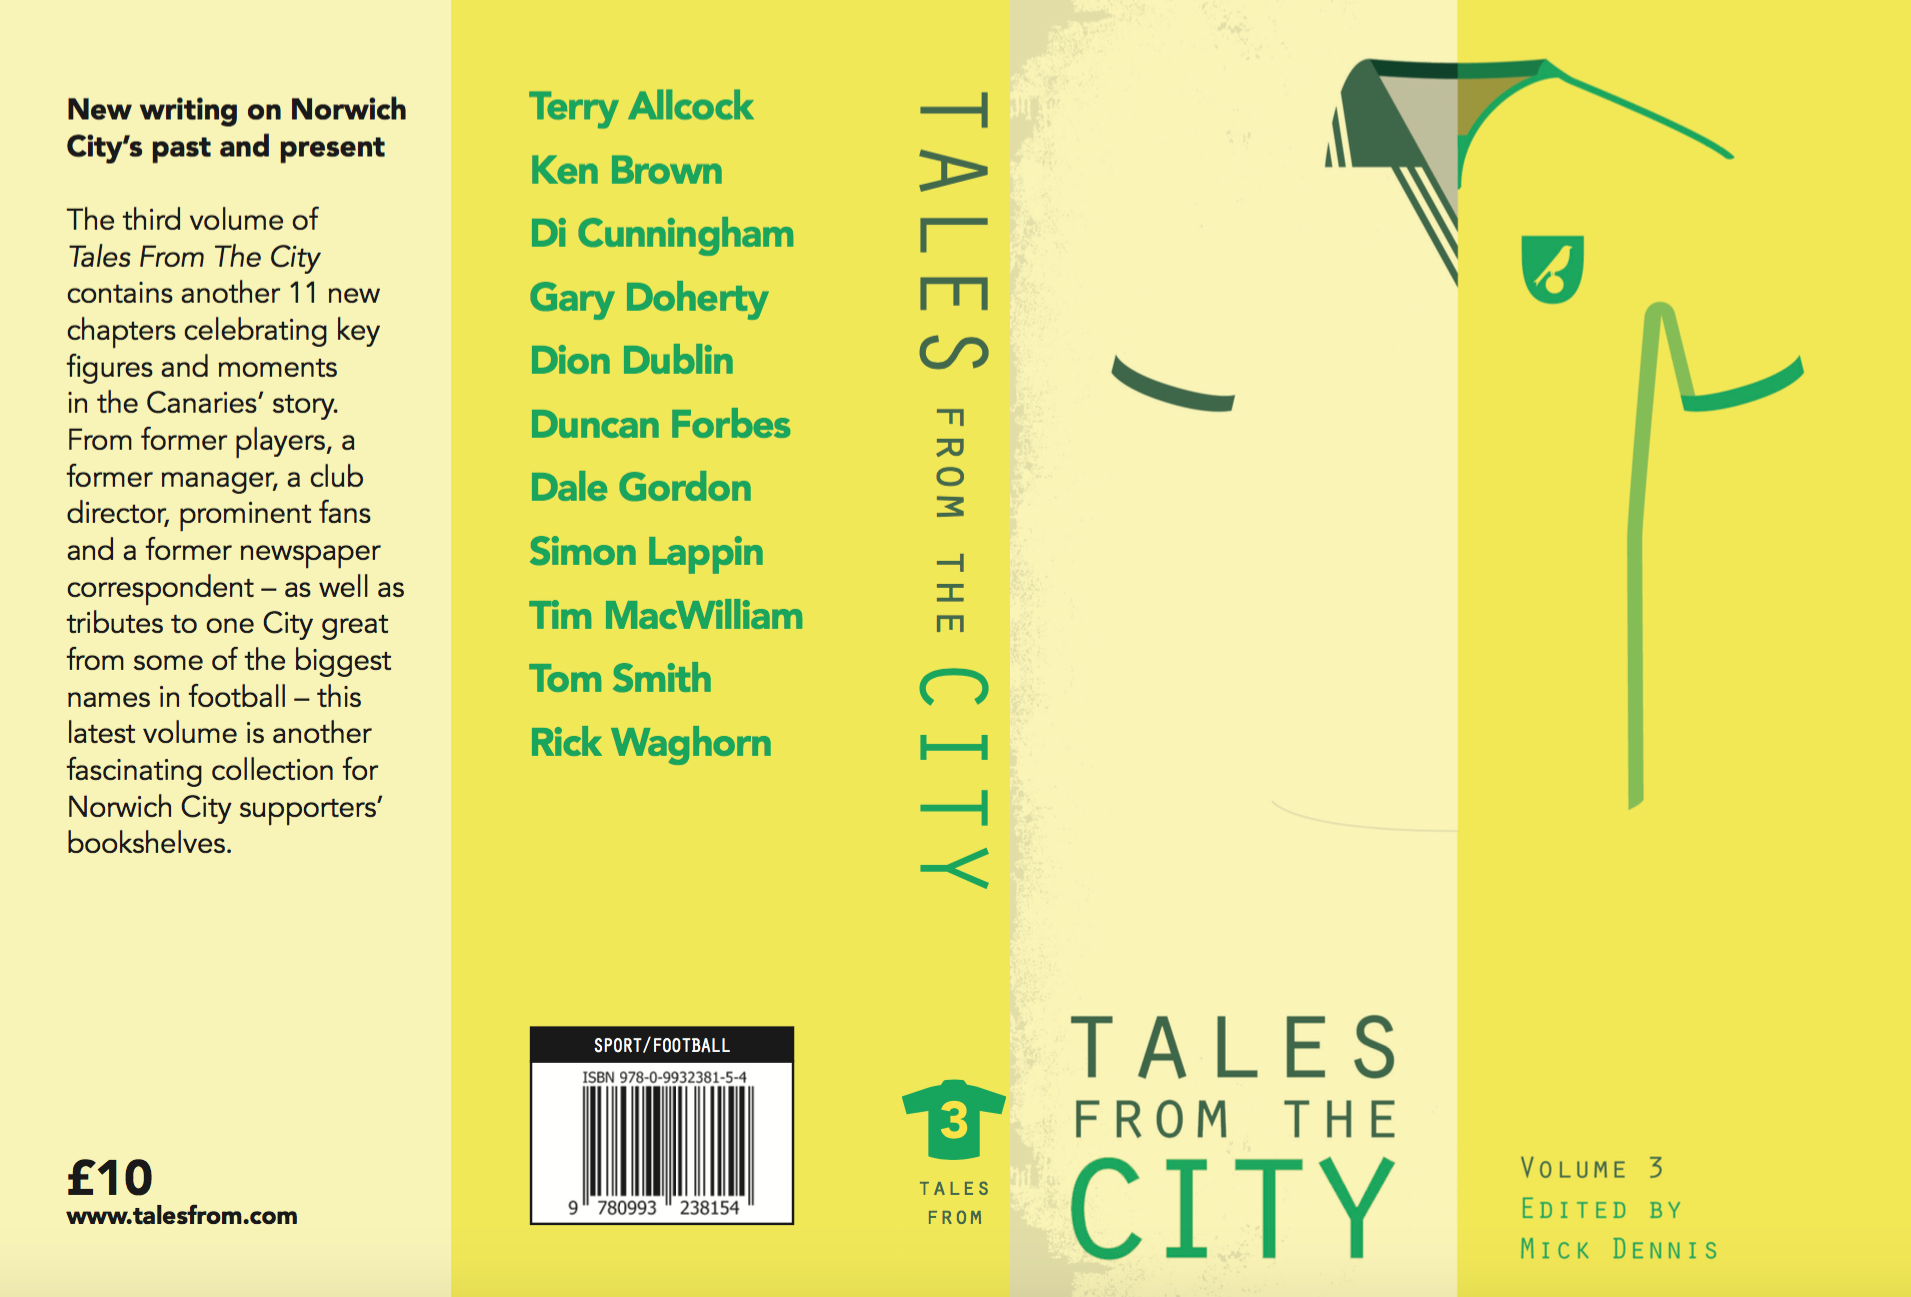 Tales from the City Volume 3